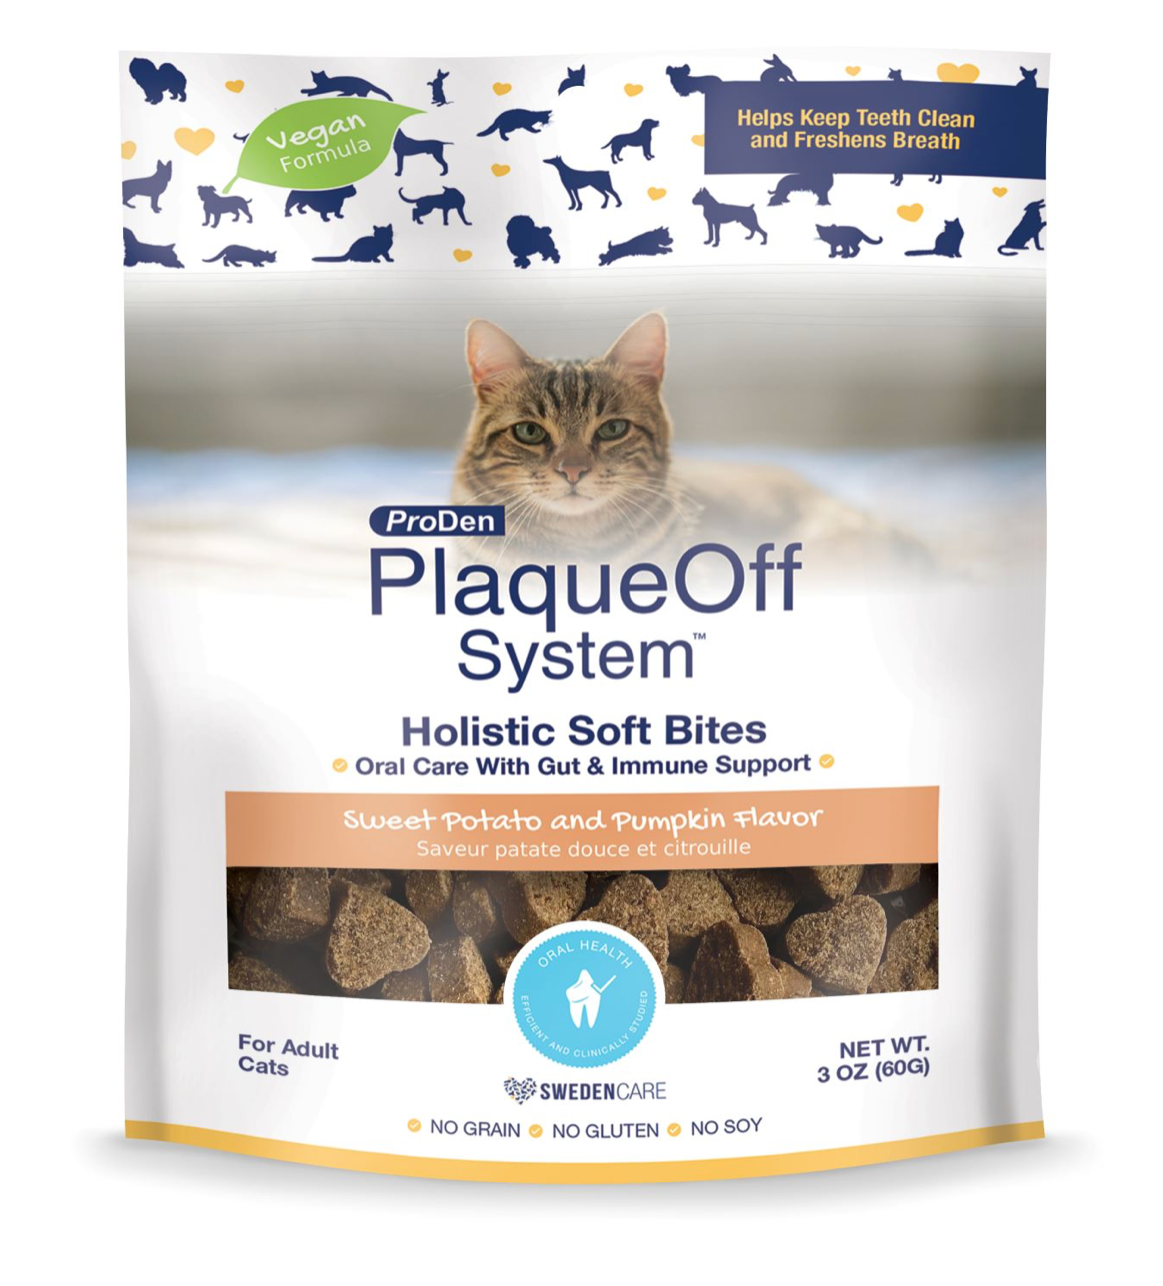 Holistic Soft Bites Cat Treat - Oral Care with Gut & Immune Support by PlaqueOff